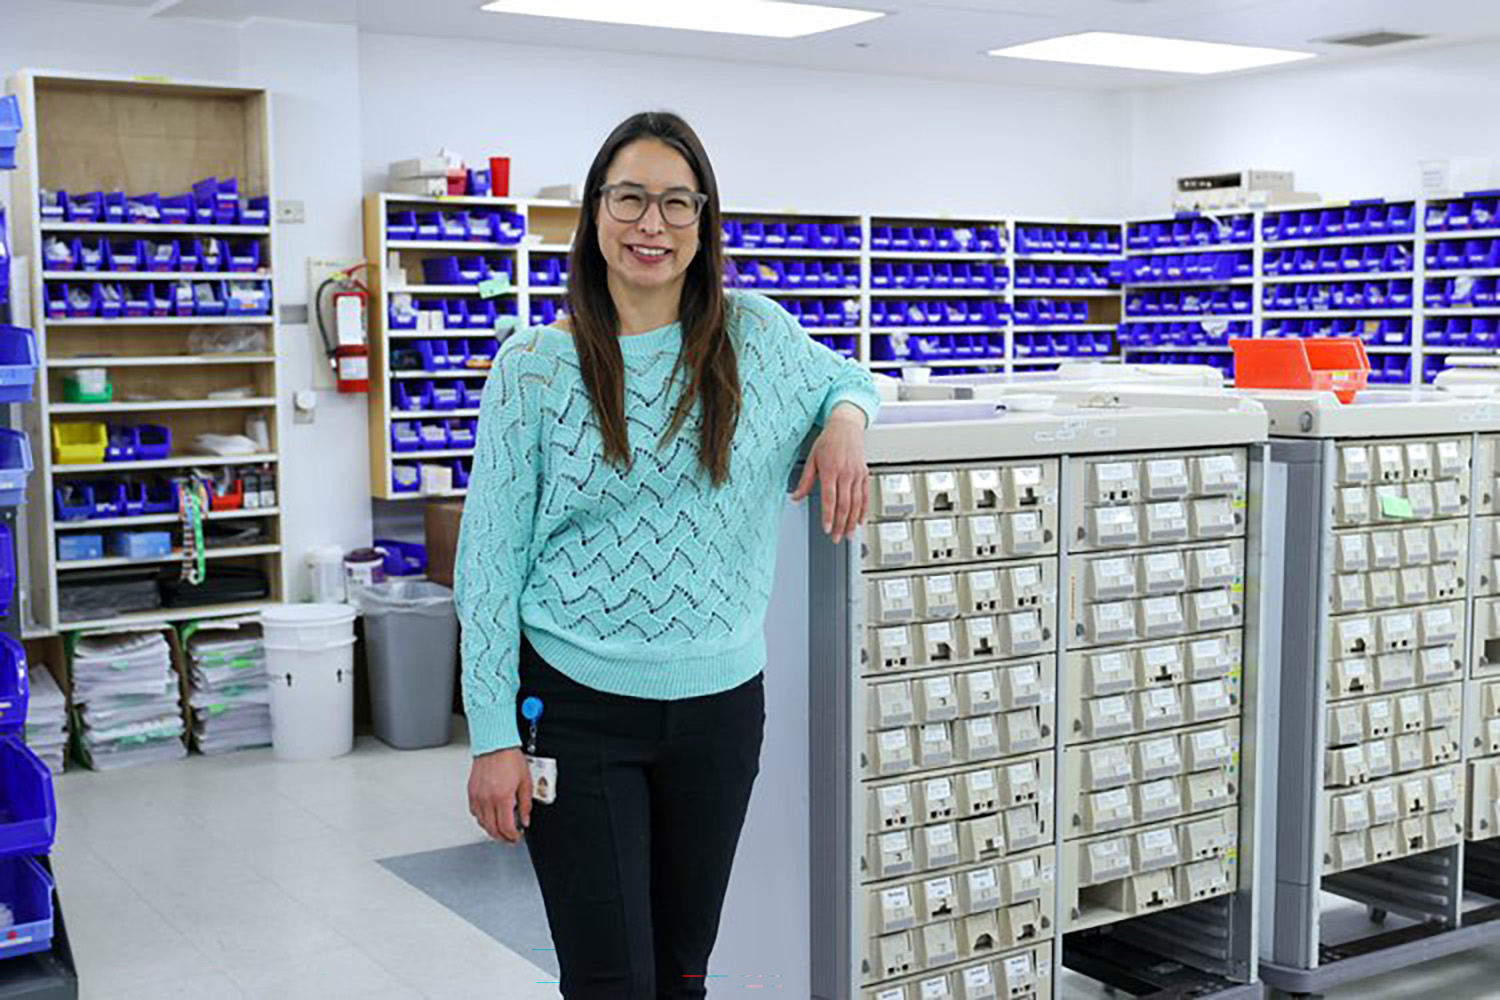 Amber Ruben poses smiling in the pharmacy storage room.